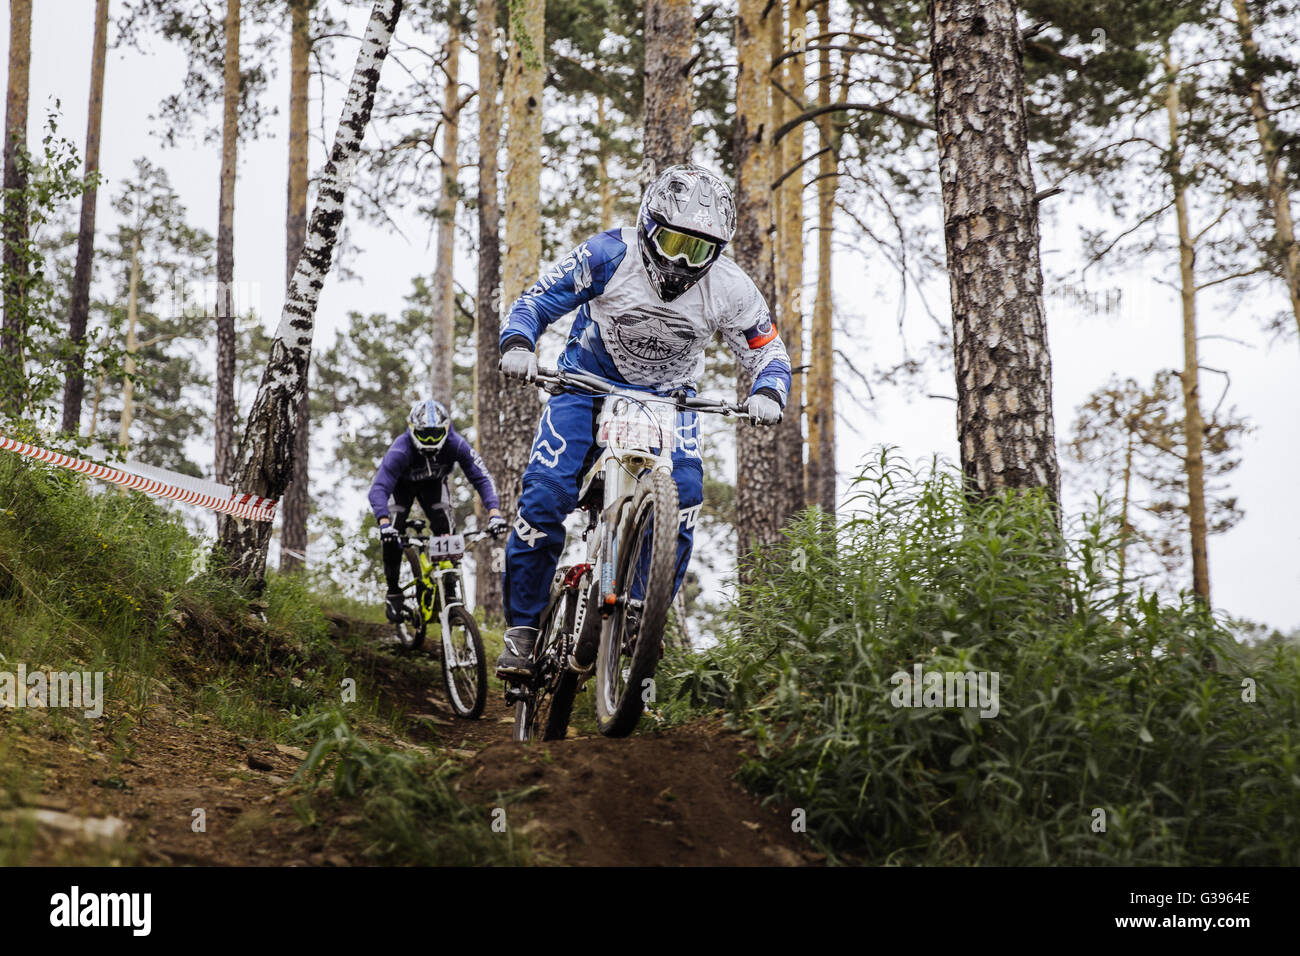 rivalry between two athletes mountain bikers on track during Cup 'Ryder' downhill Stock Photo